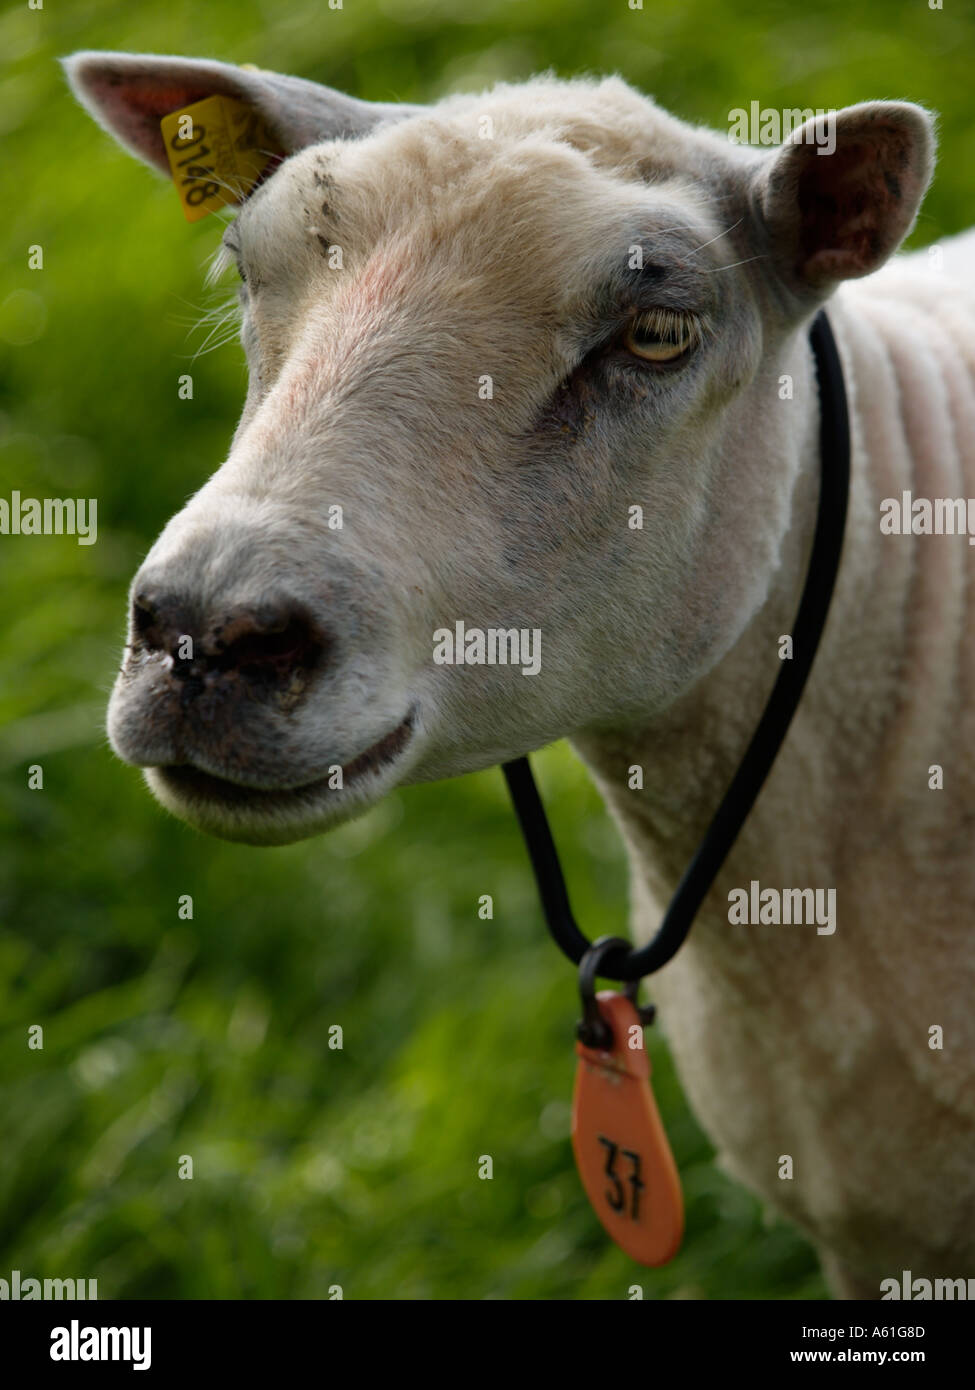 Portrait of a sheep with several tags that has just been shaved sheepish look grass Stock Photo